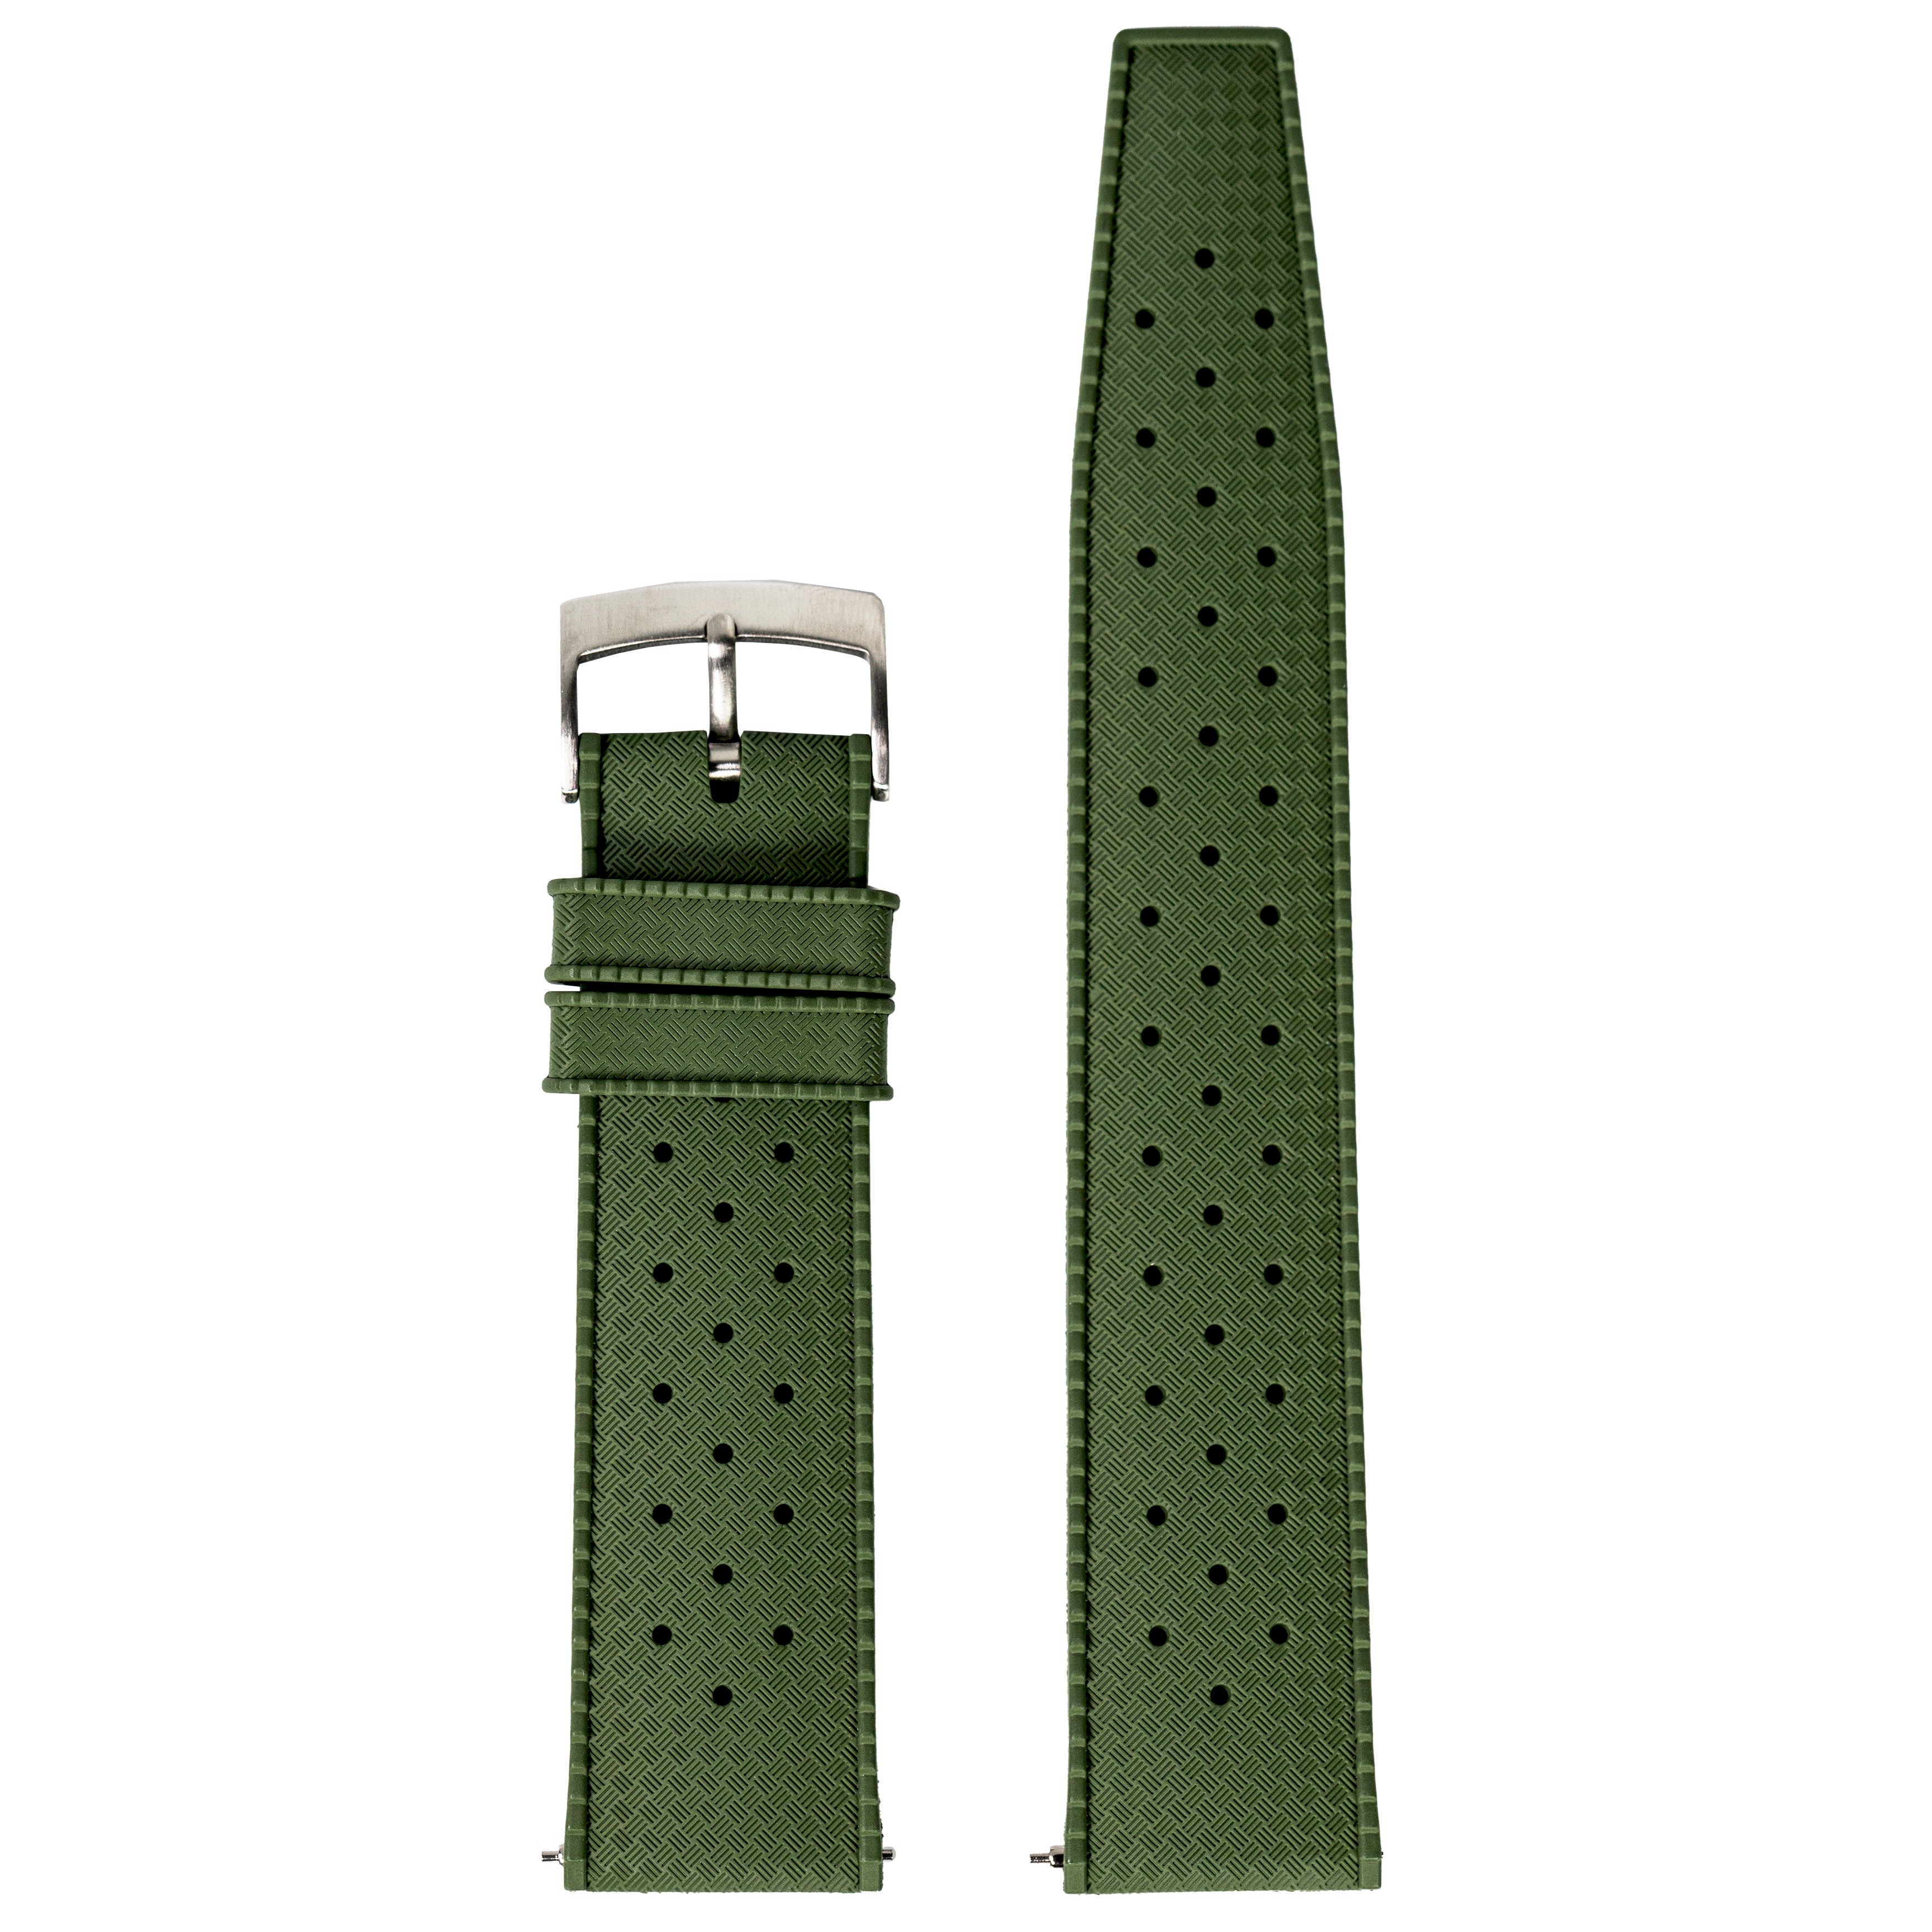 [QuickFit] King Tropic FKM Rubber - Forest Green 22mm